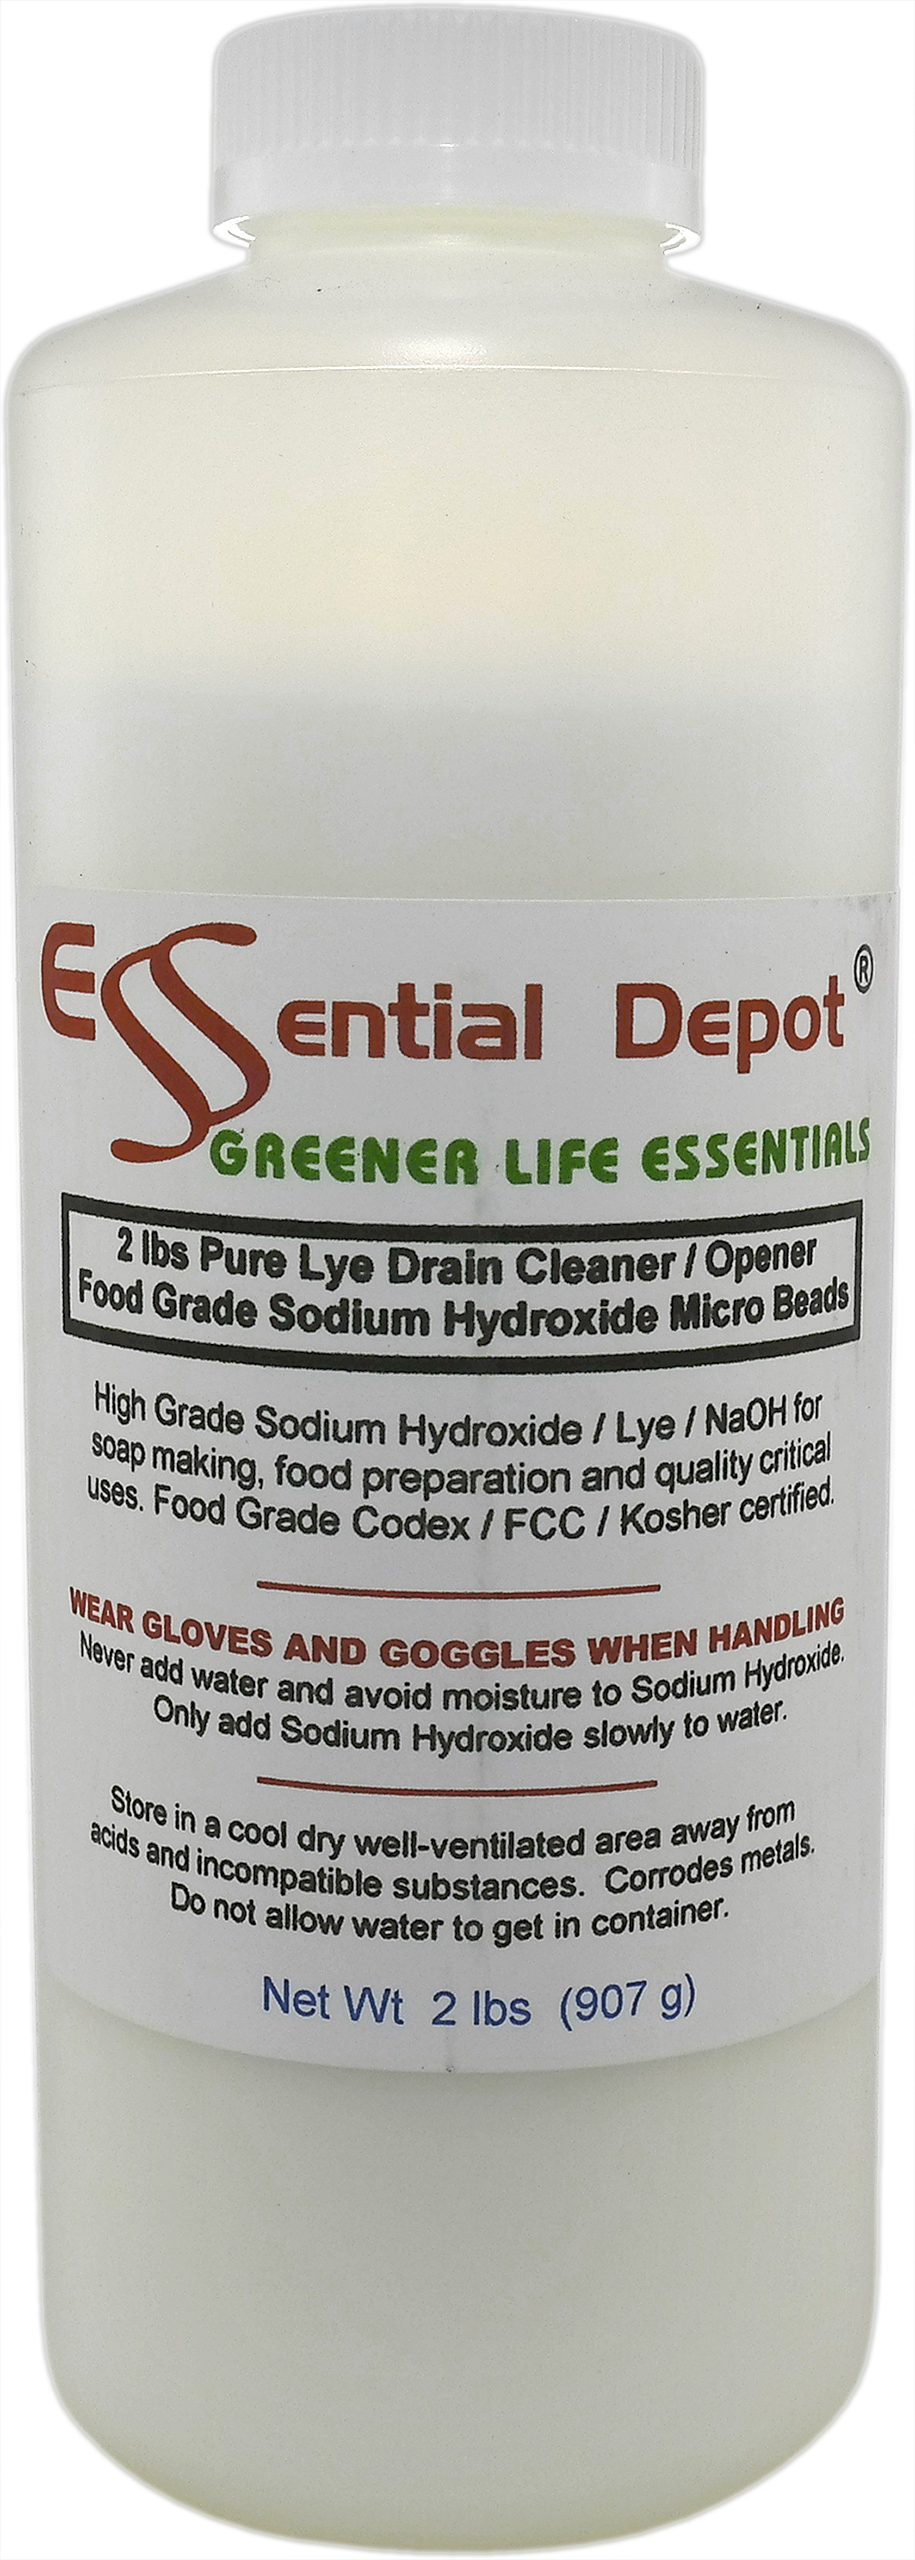 Sodium Hydroxide Lye Micro Beads - Food Grade - USP - 2 lbs - Makes best  soap and great for pretzels: Essential Depot